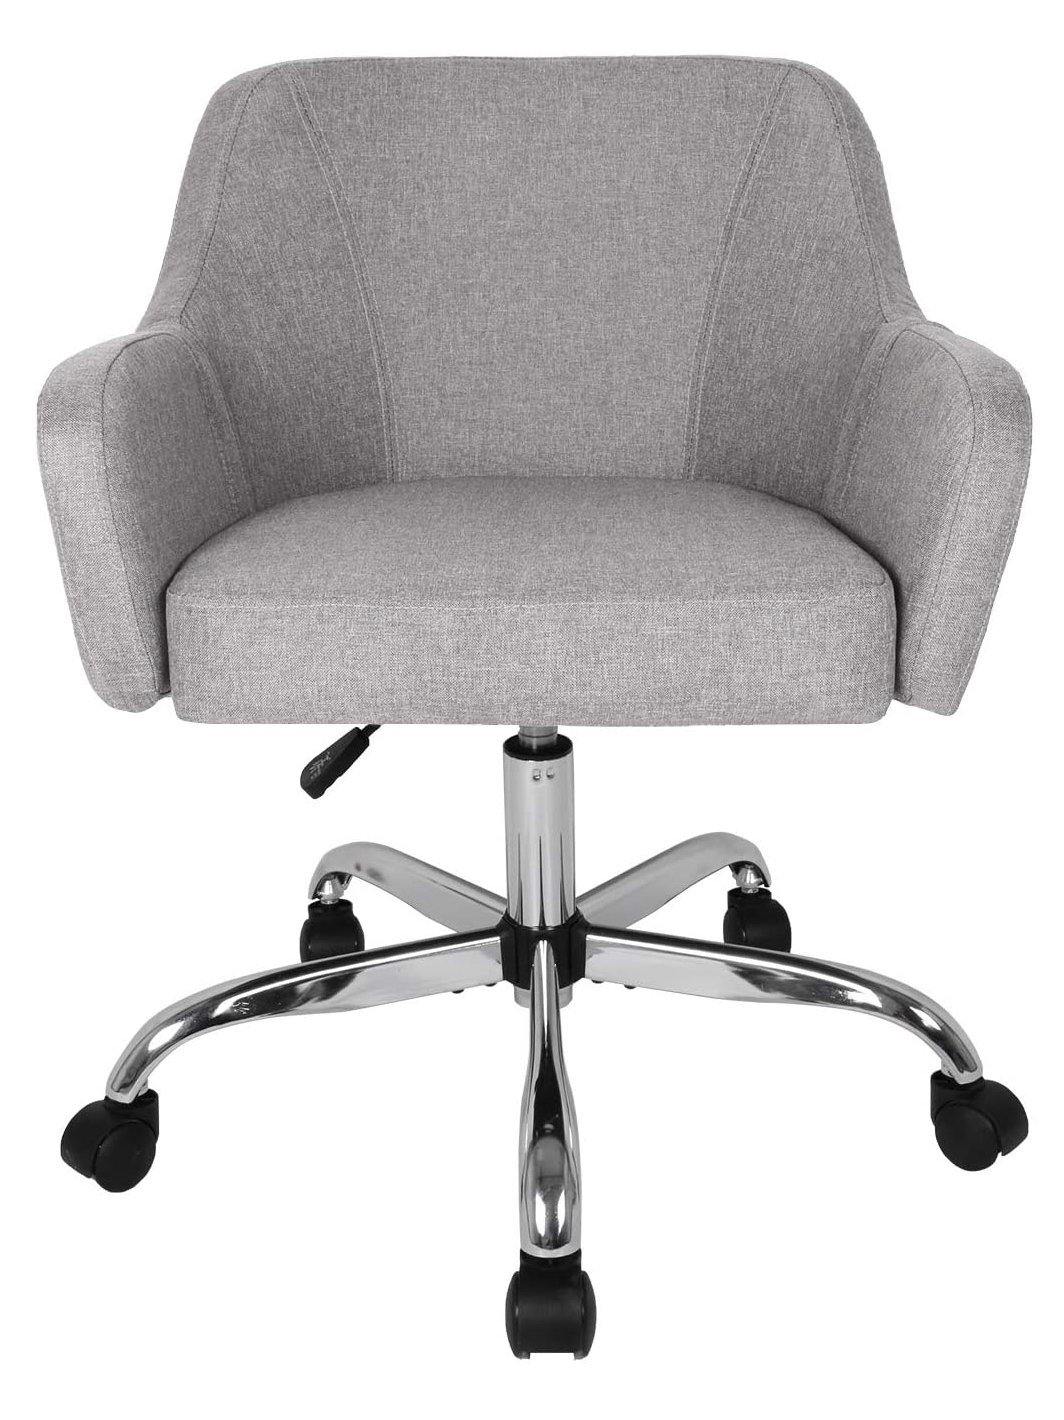 Home Office Chair Padded Computer Task Chair Adjustable Desk Chair with Swivel Casters for Office Leisure Grey - Trendha